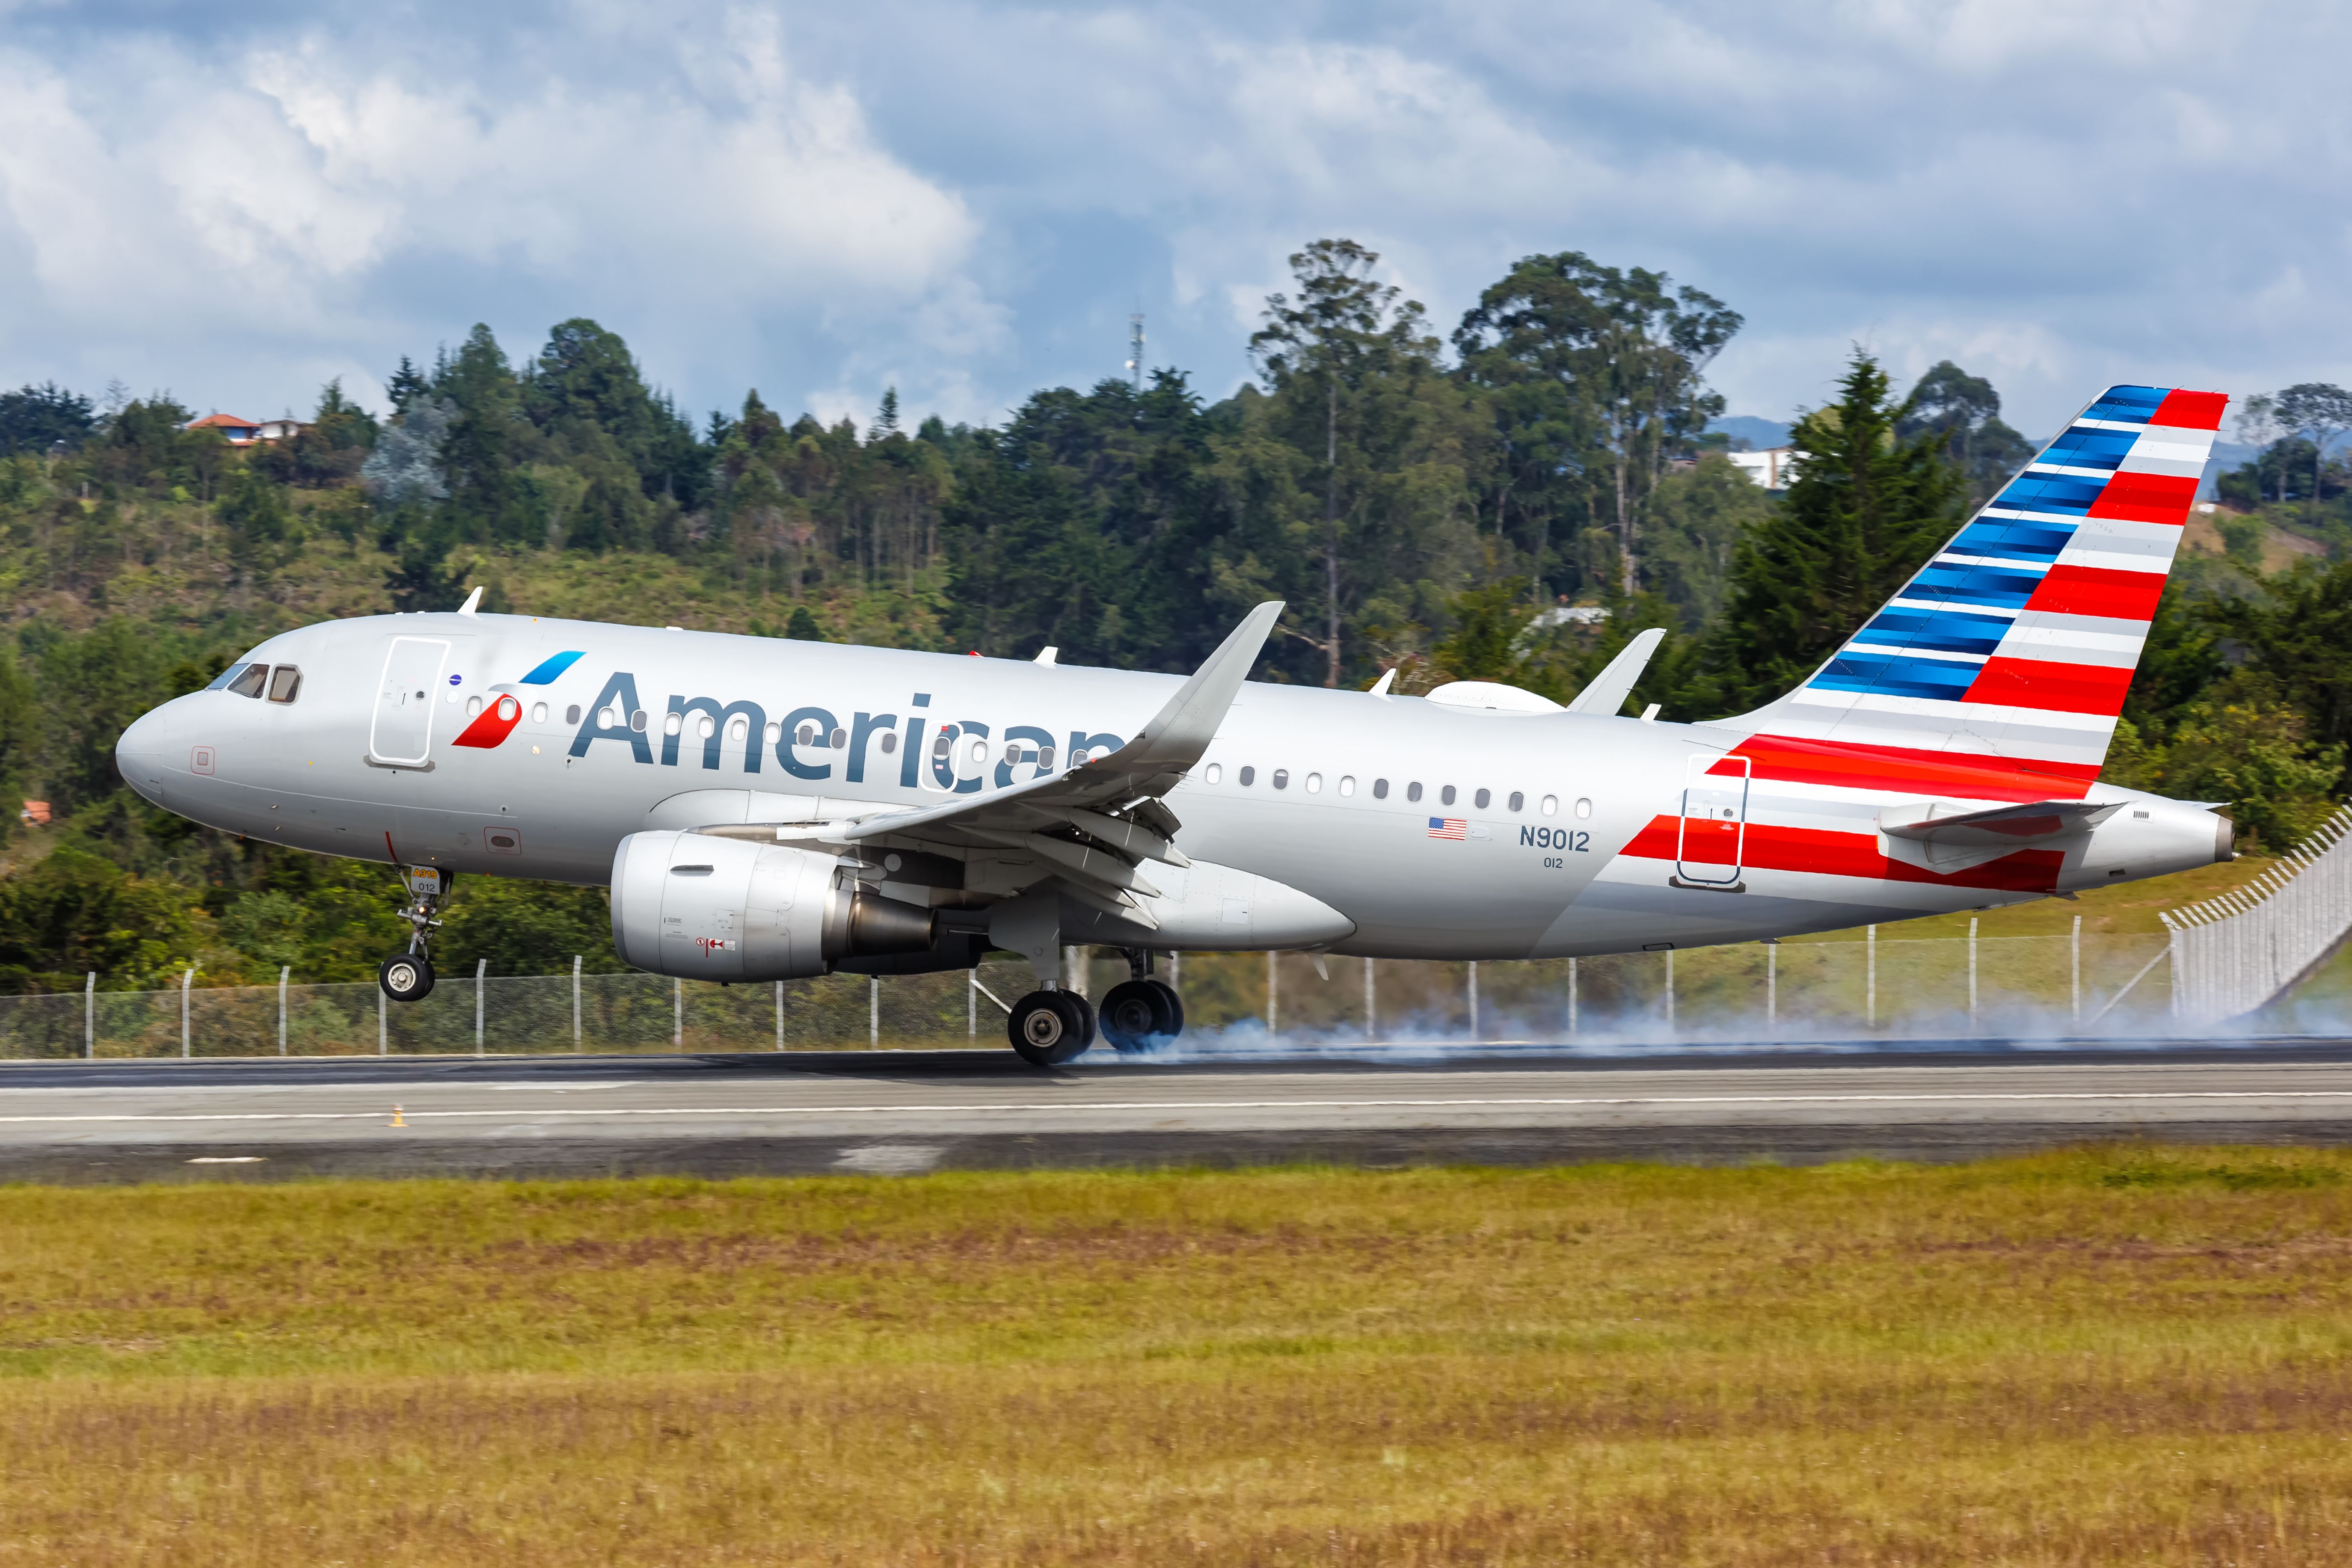 An American Airlines Airbus A319-115 as it lands.